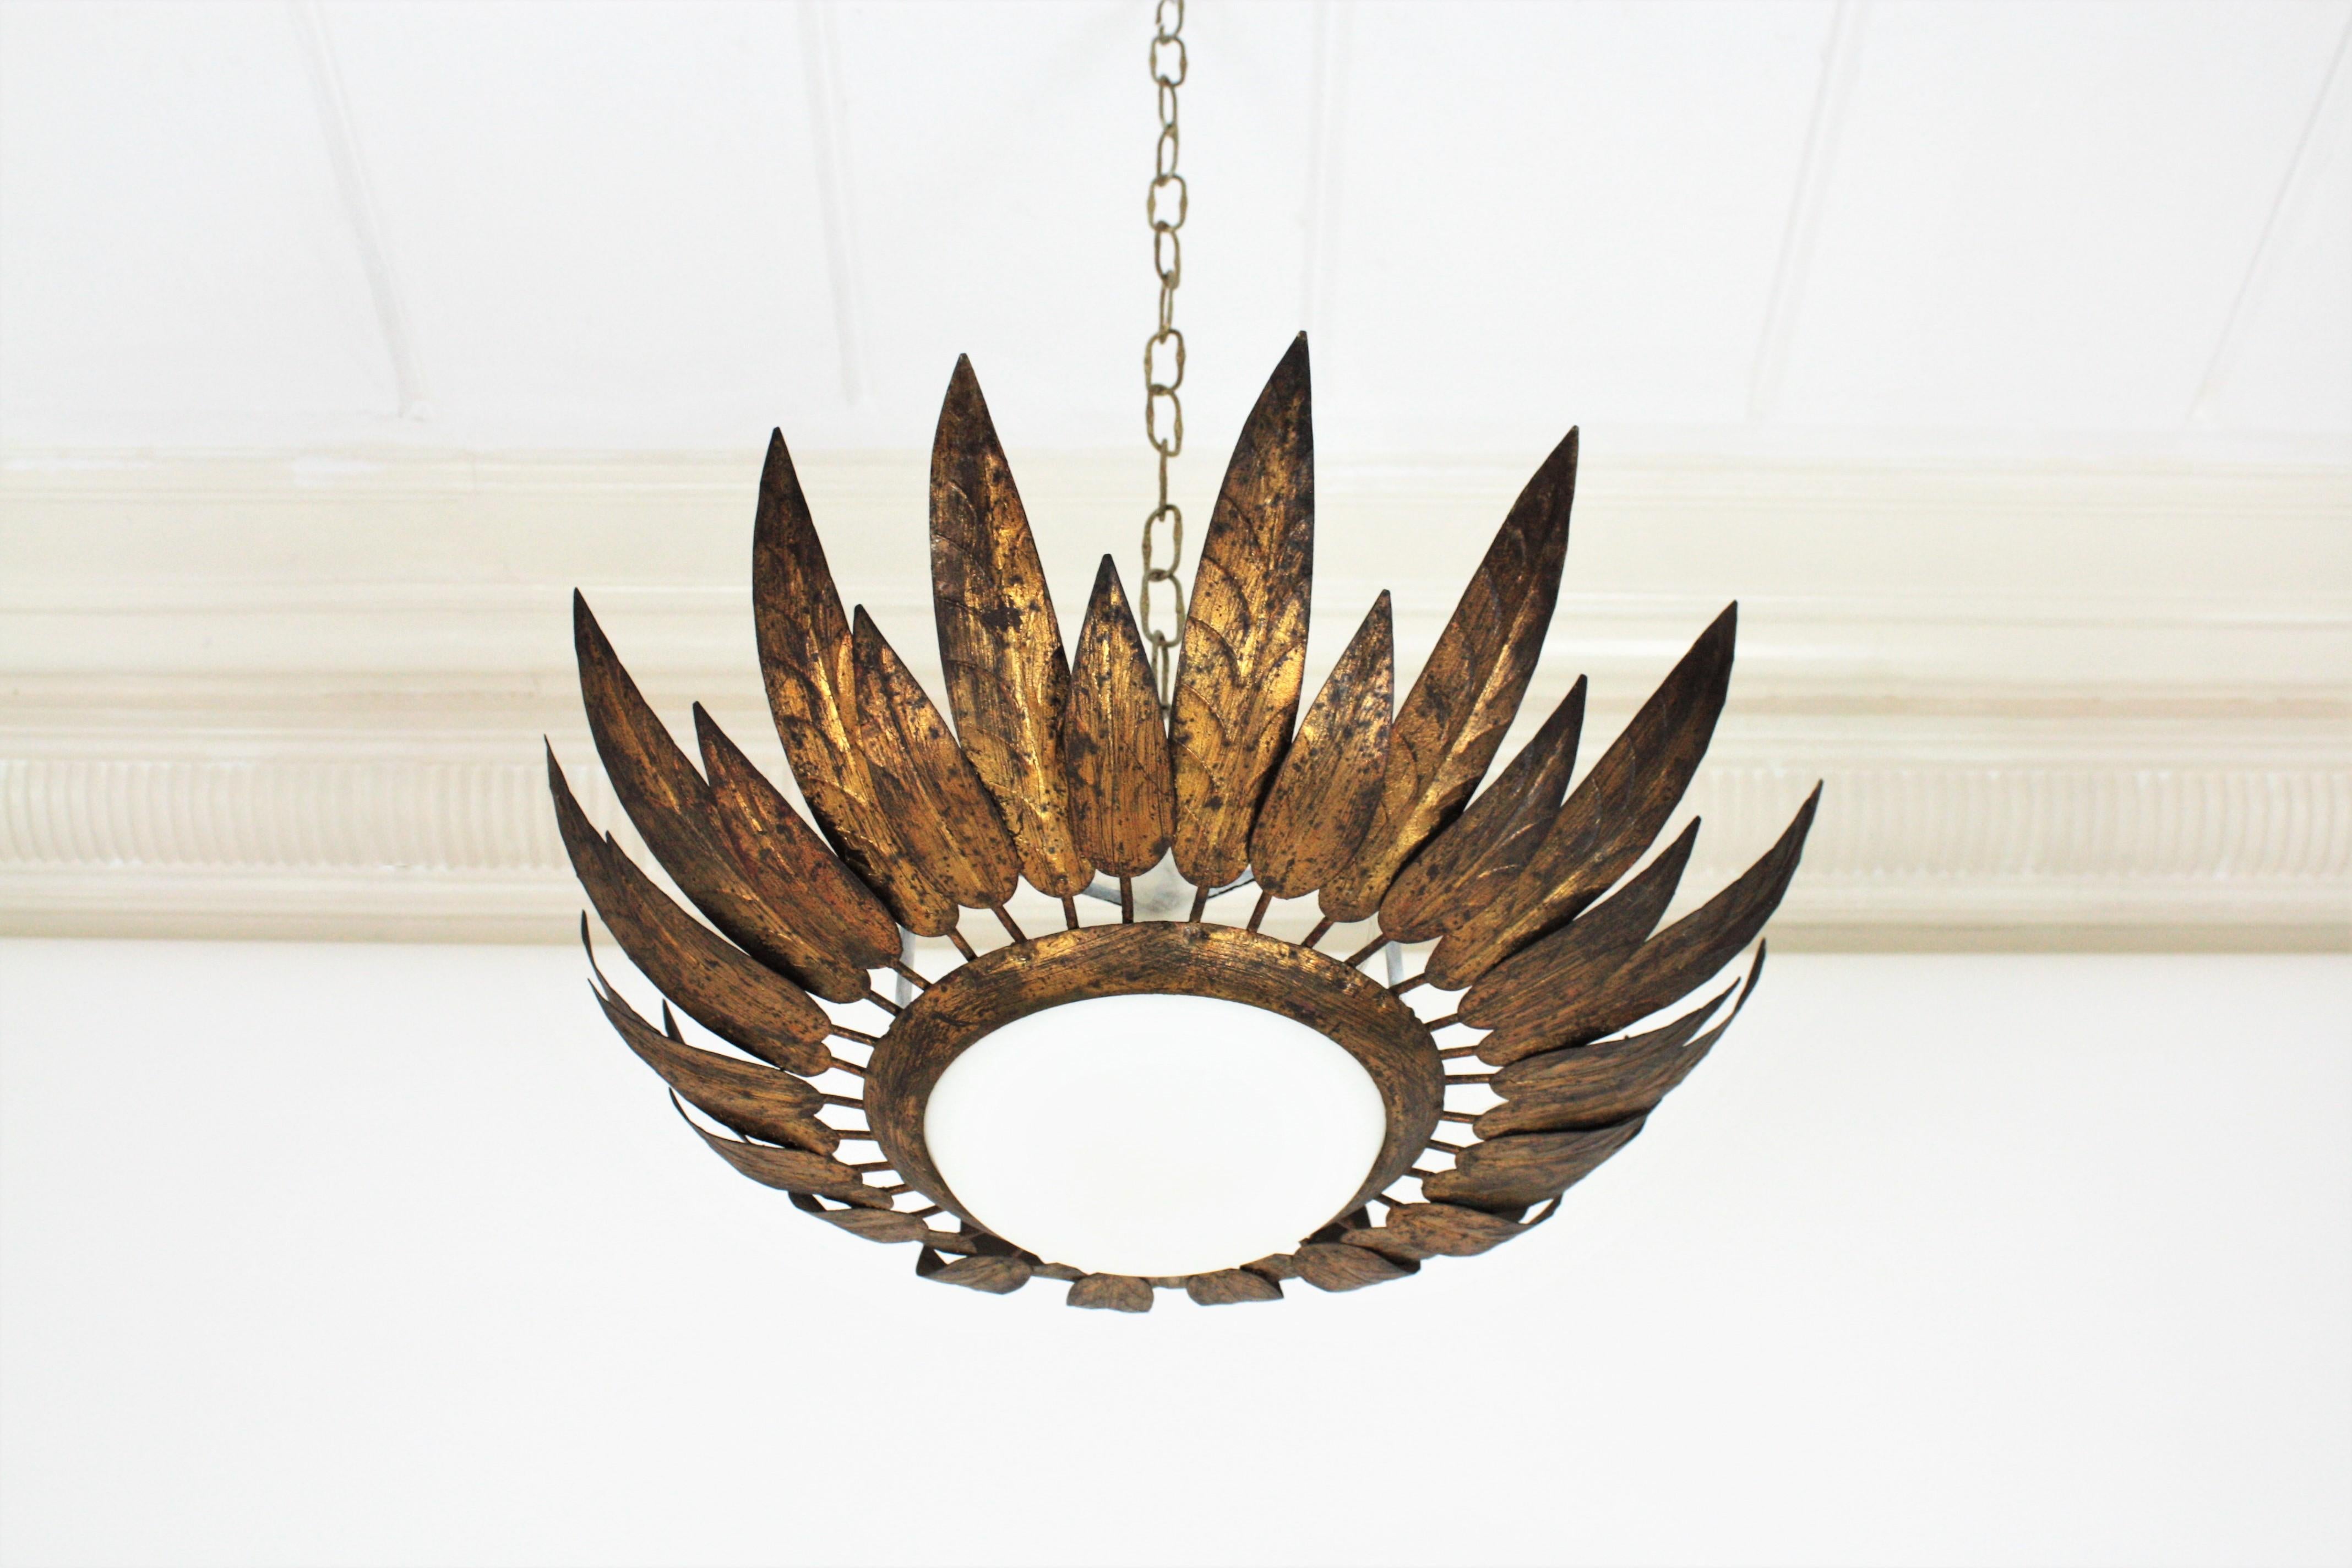 Gold leaf gilt iron flower shaped sunburst light fixture with leafed / feathers frame, France, 1950s
This lovely flush mount was manufactured at the Mid-Century Modern period in the style of Hollywood Regency. 
It has alternating short and long